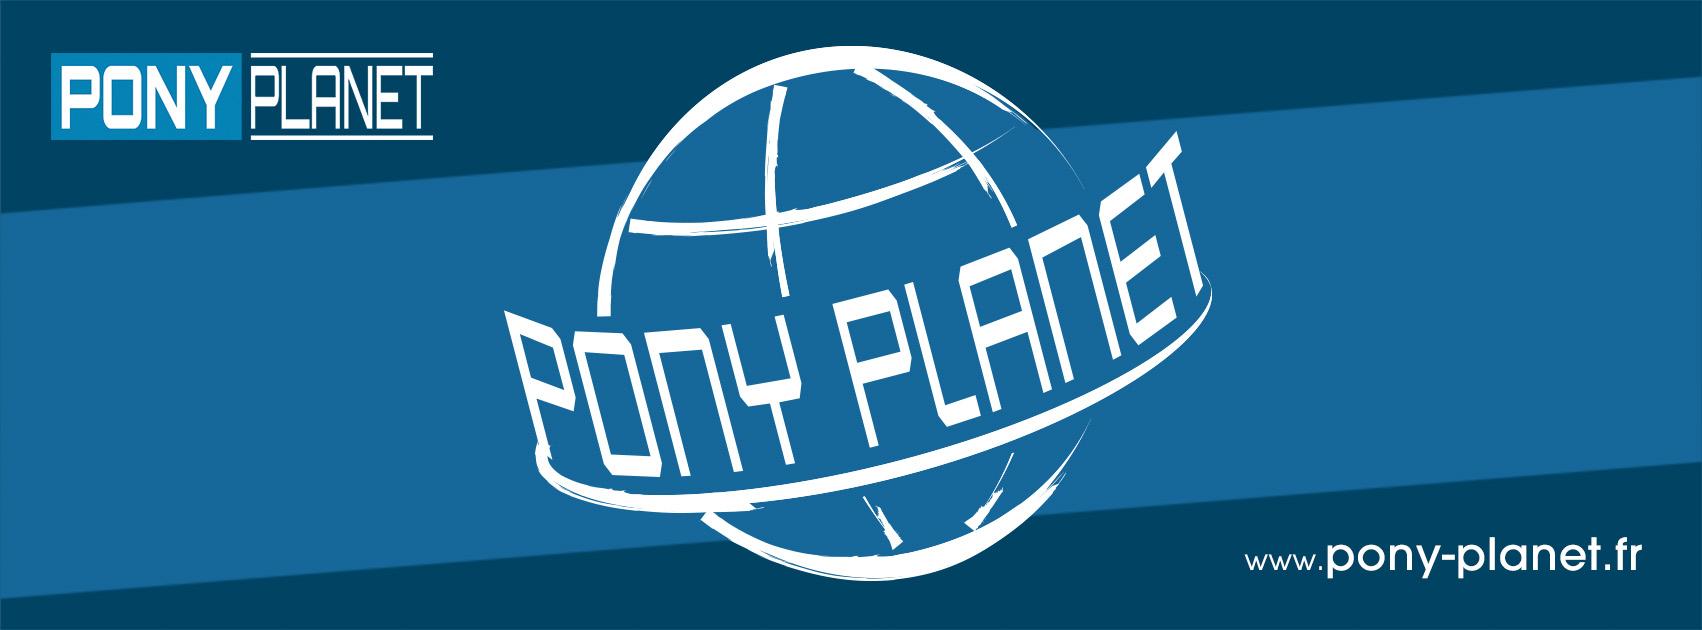 Pony Planet is also on Facebook